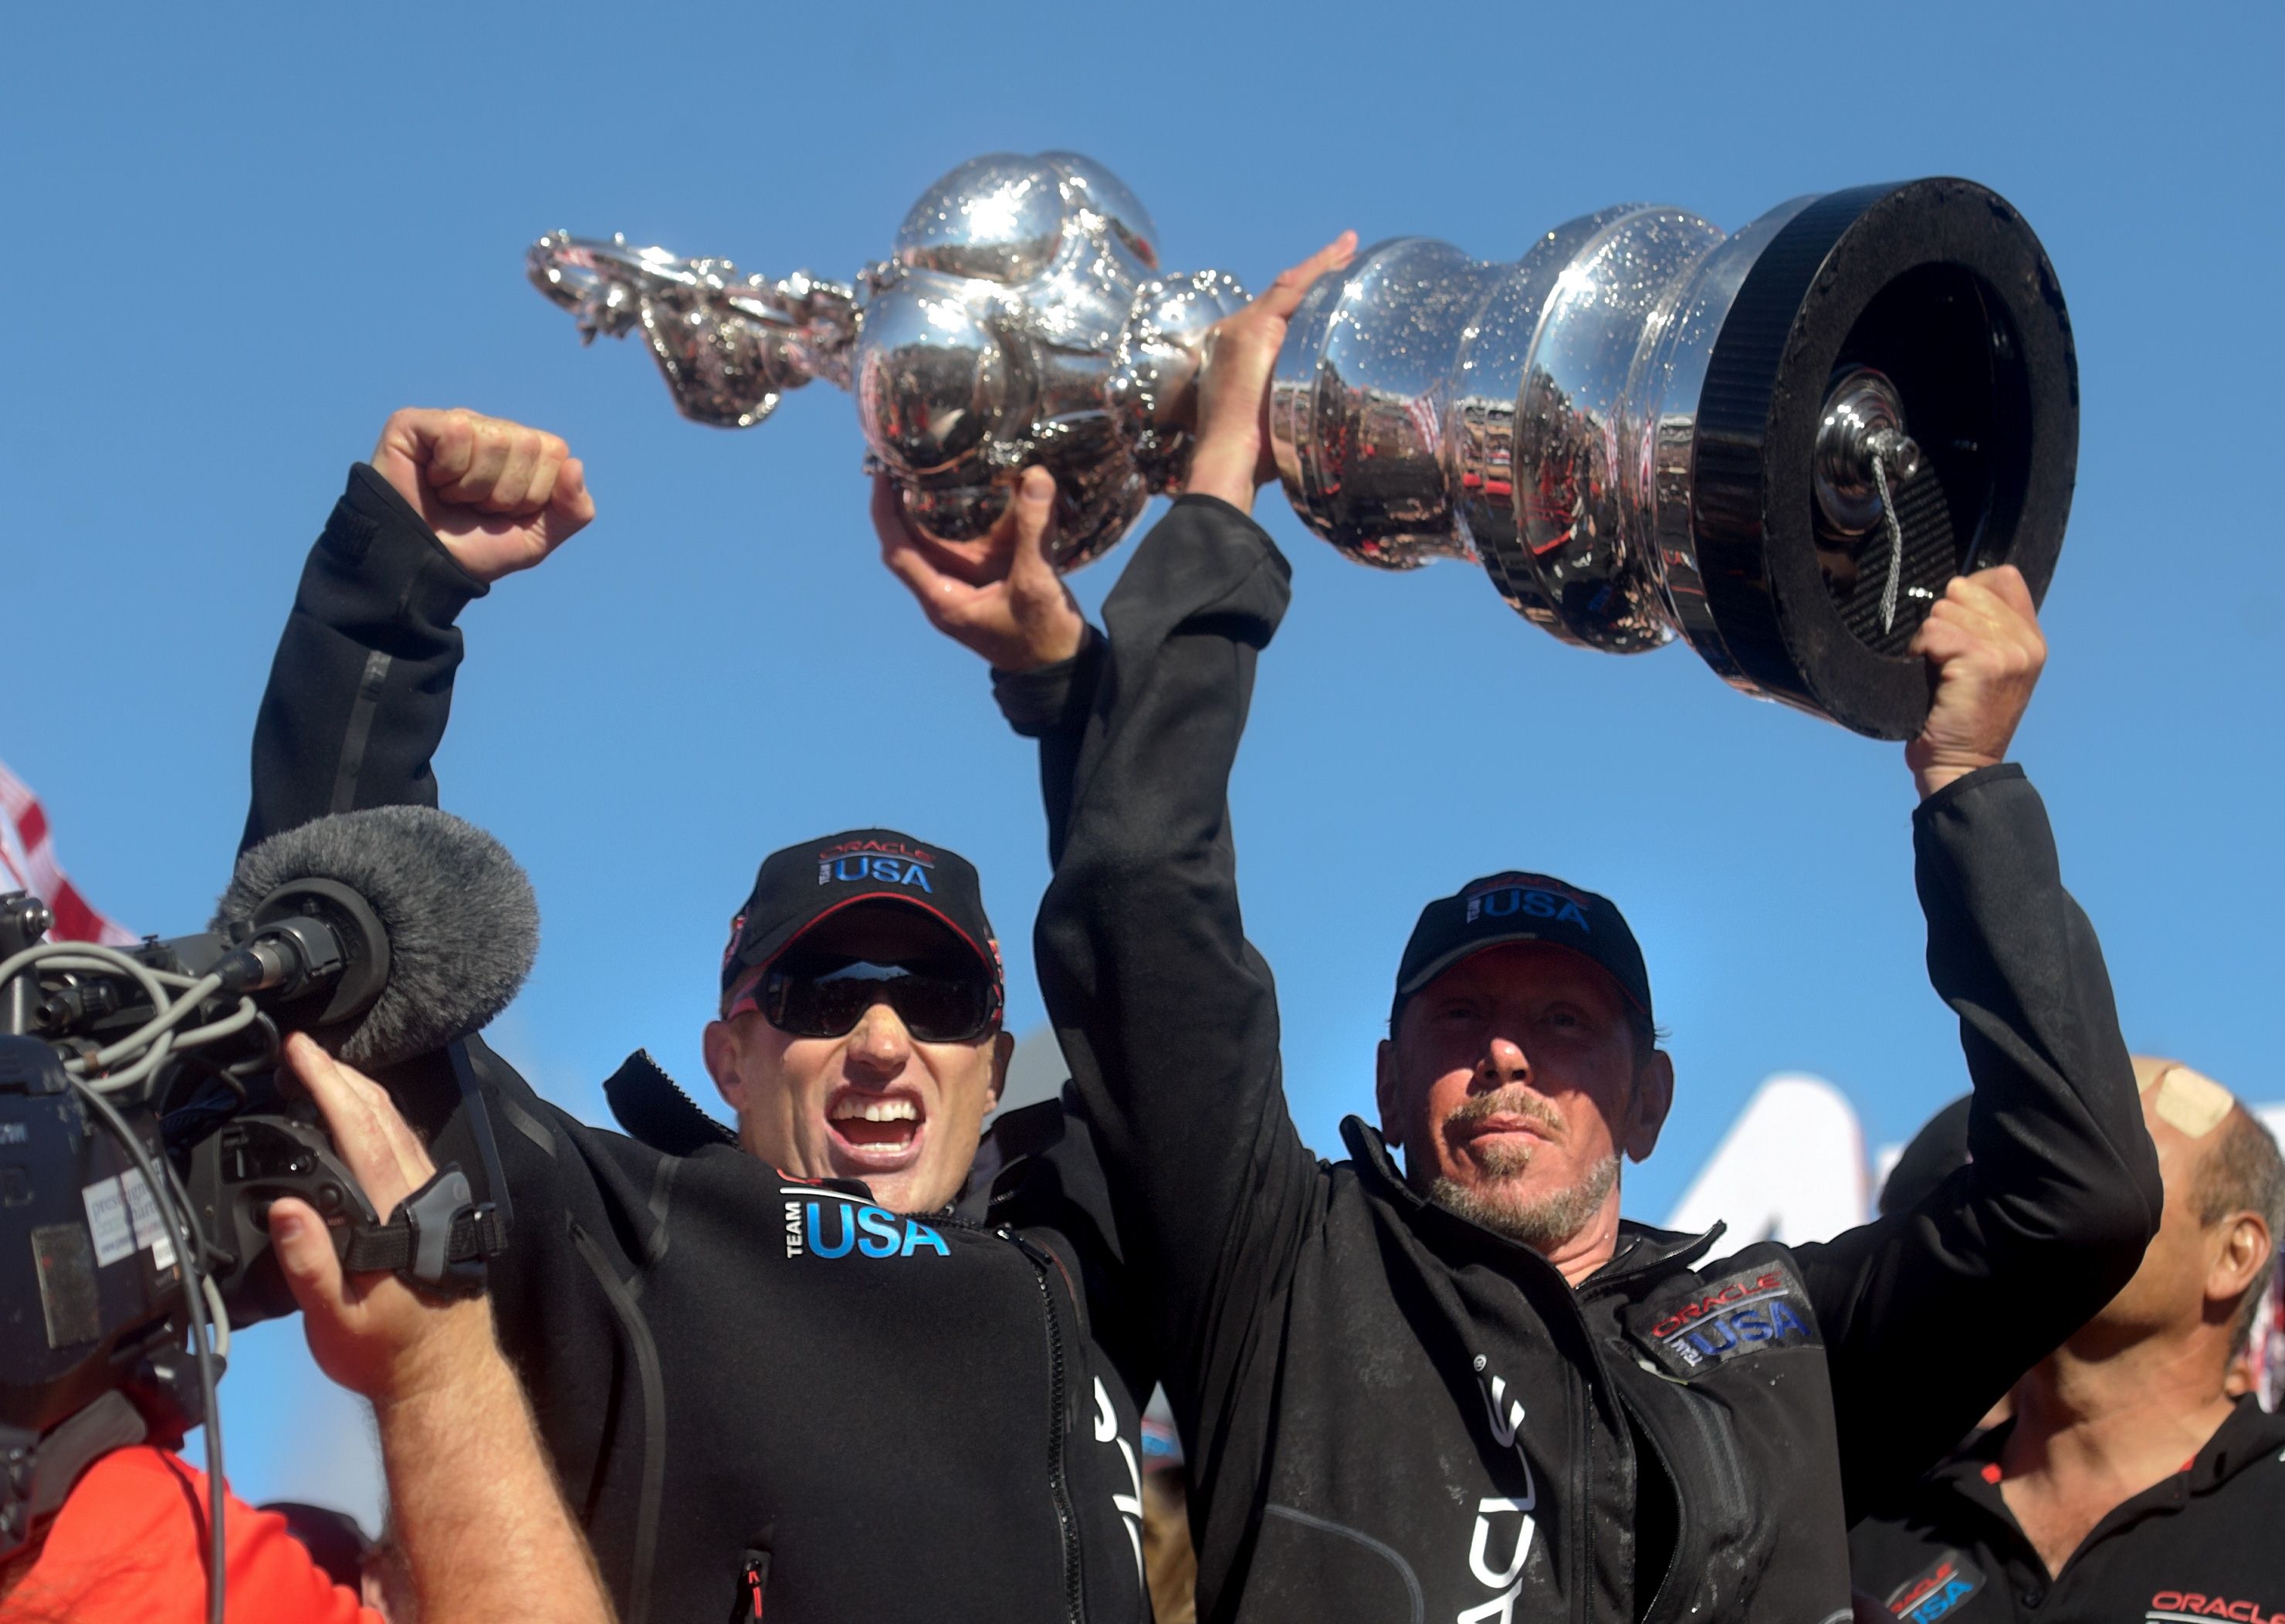 Oracle Team USA skipper Jimmy Spithill (left) and Oracle Corp. CEO Larry Ellison hoist the America's Cup trophy after beating Emirates Team New Zealand in San Francisco. Photo: AFP